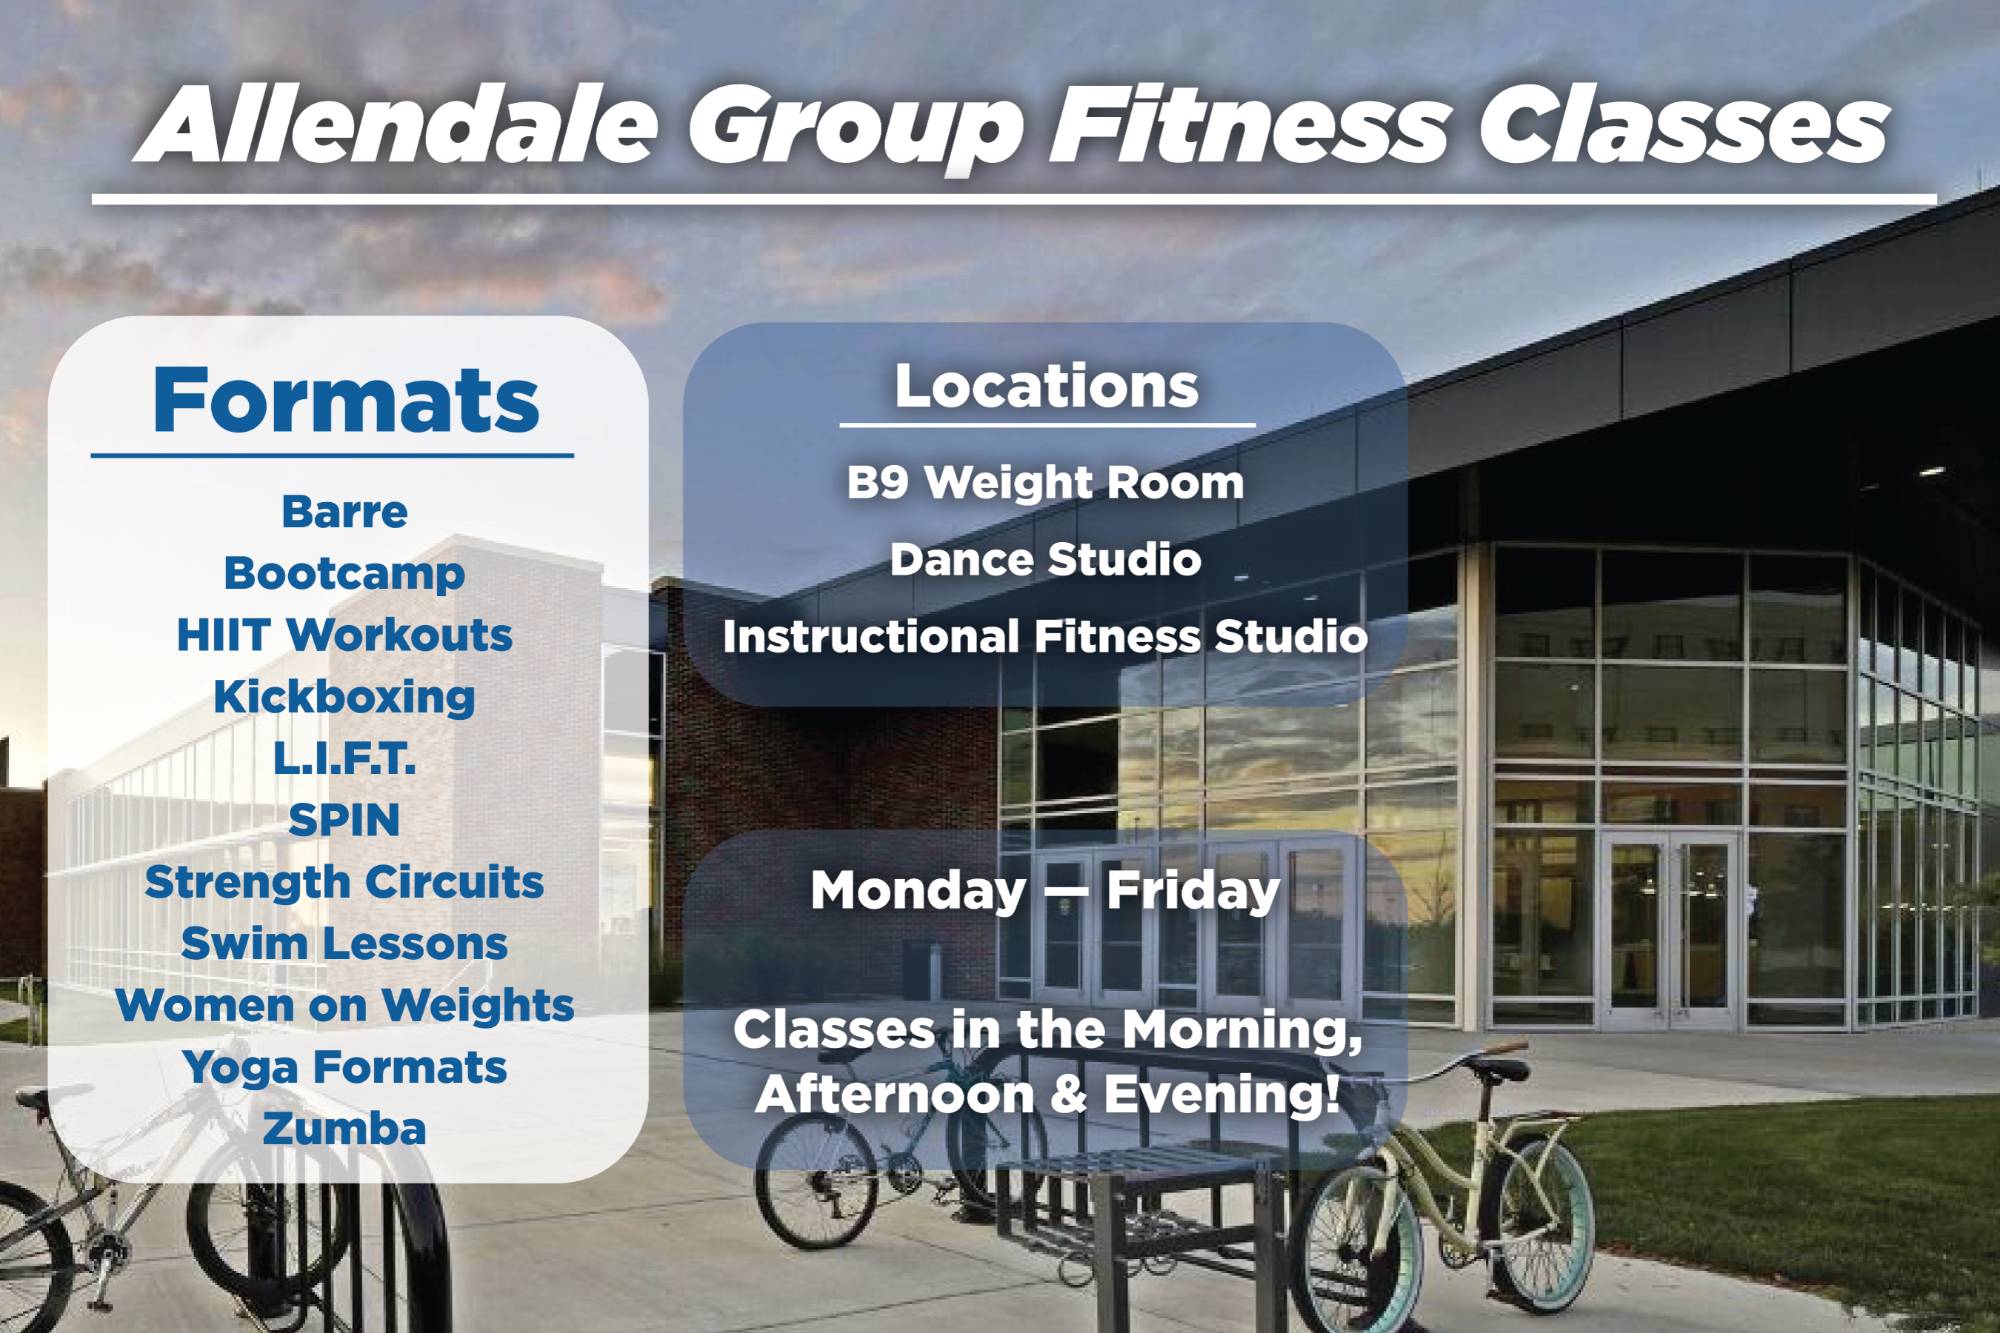 Allendale Group Exercise Information